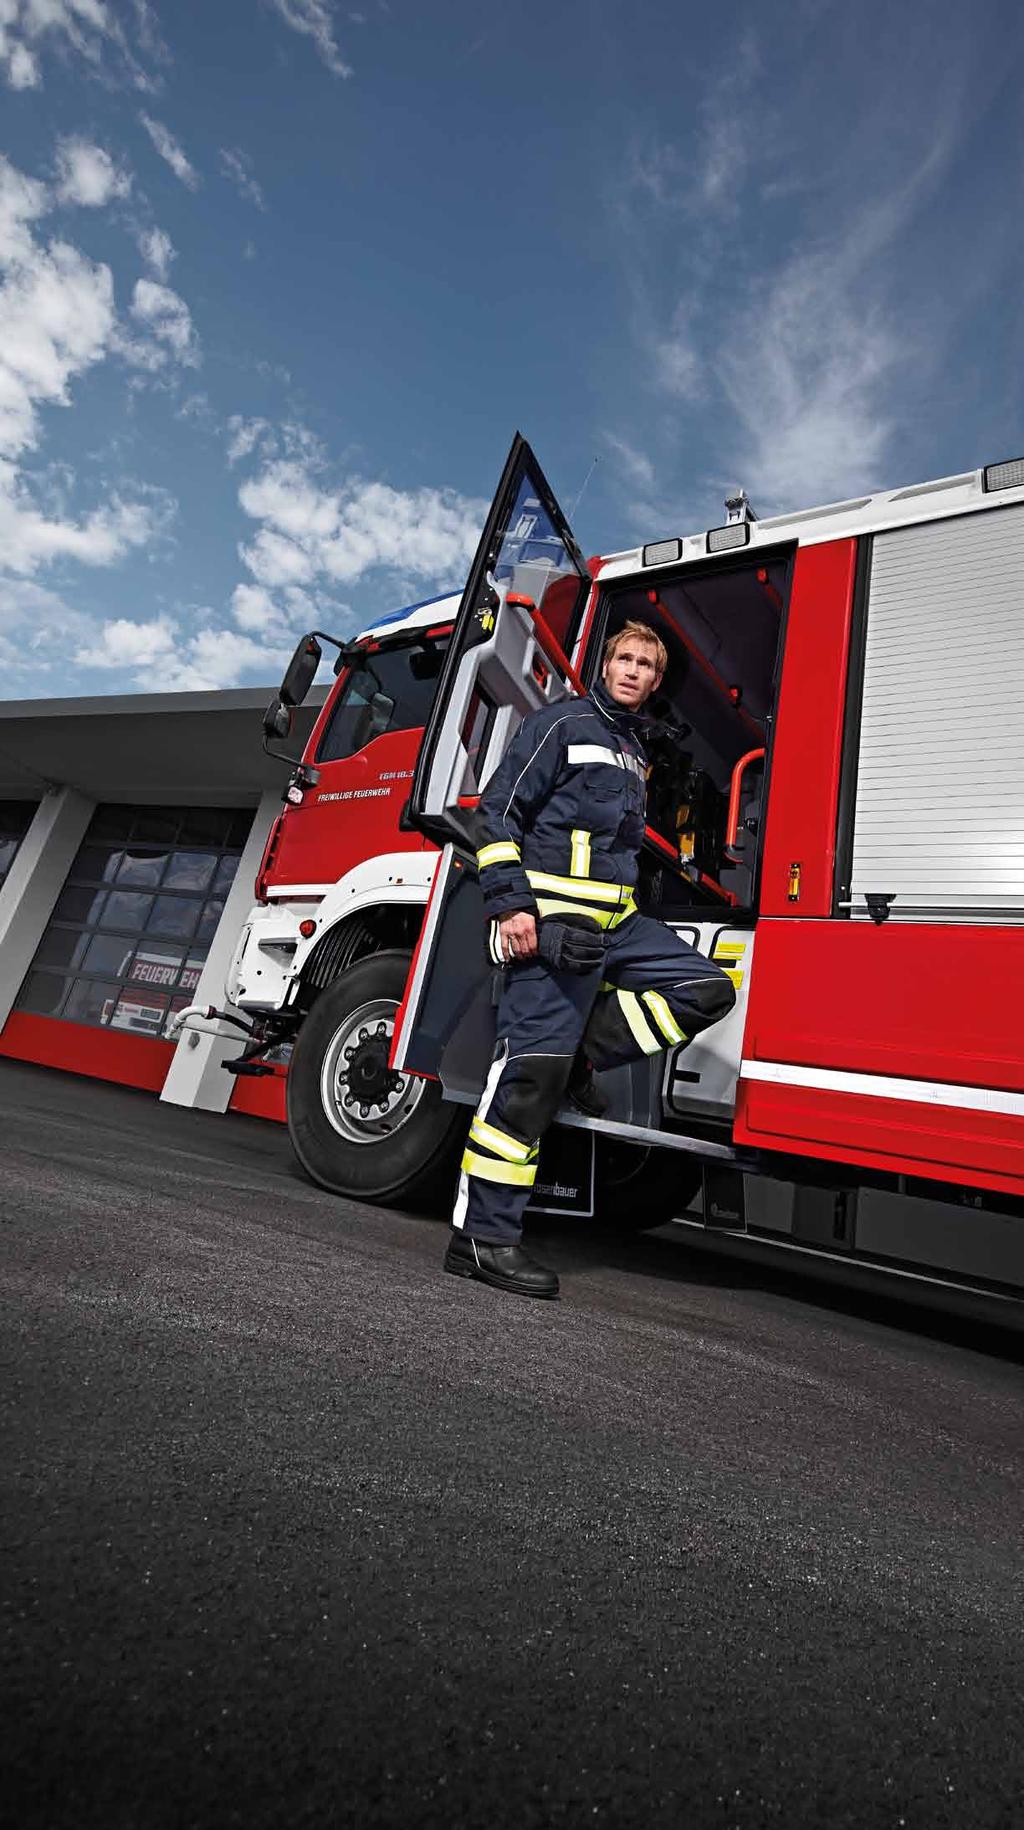 FIRE MAX 3 Next generation protection and wearing comfort.